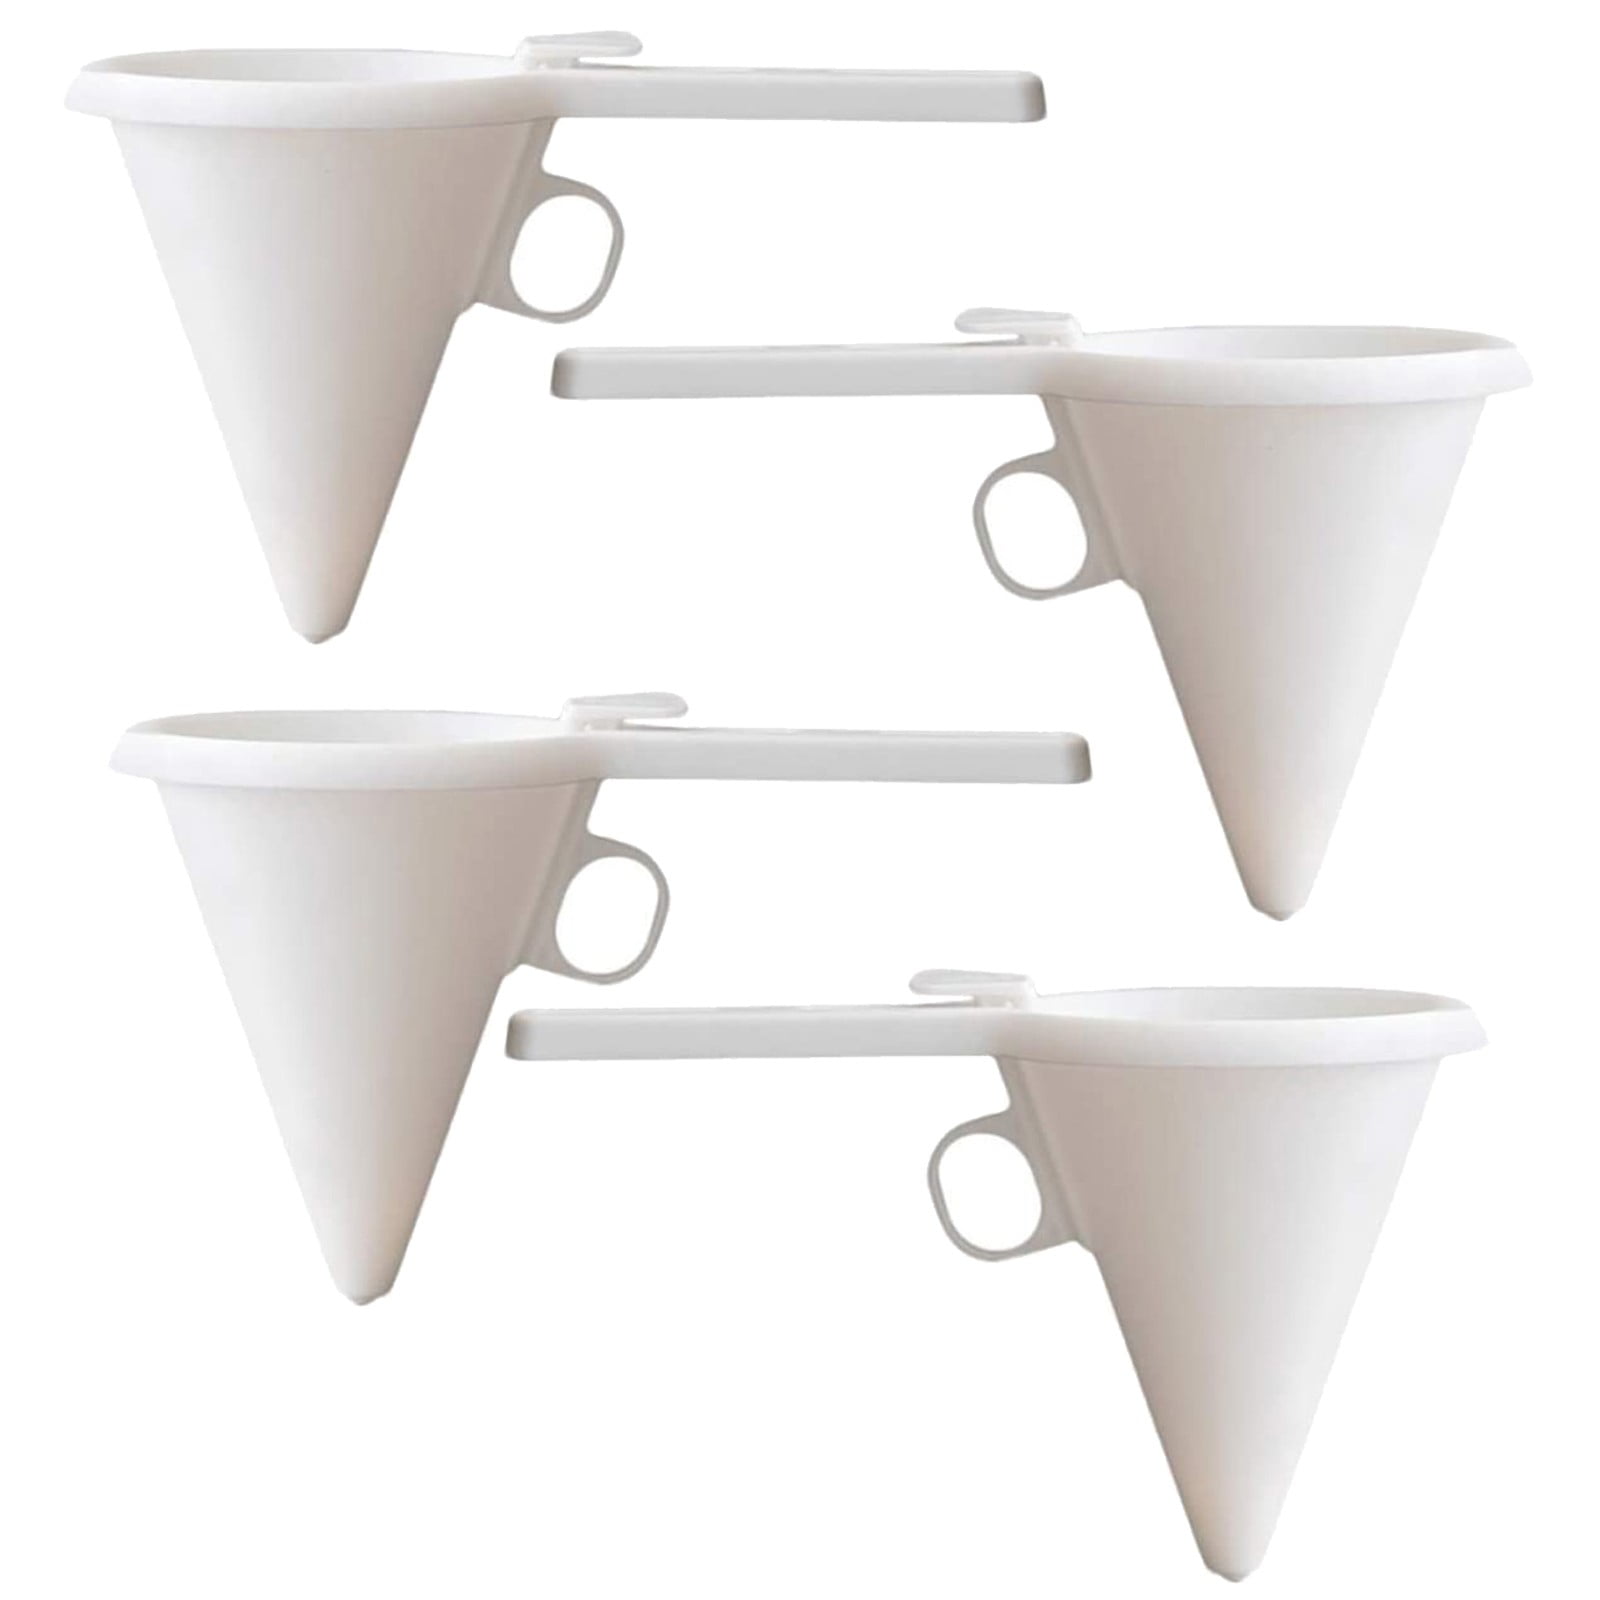 with Handle Miniature Funnel Tiny Plastic Little Funel Liquid Dispensing Funnel, Size: Small